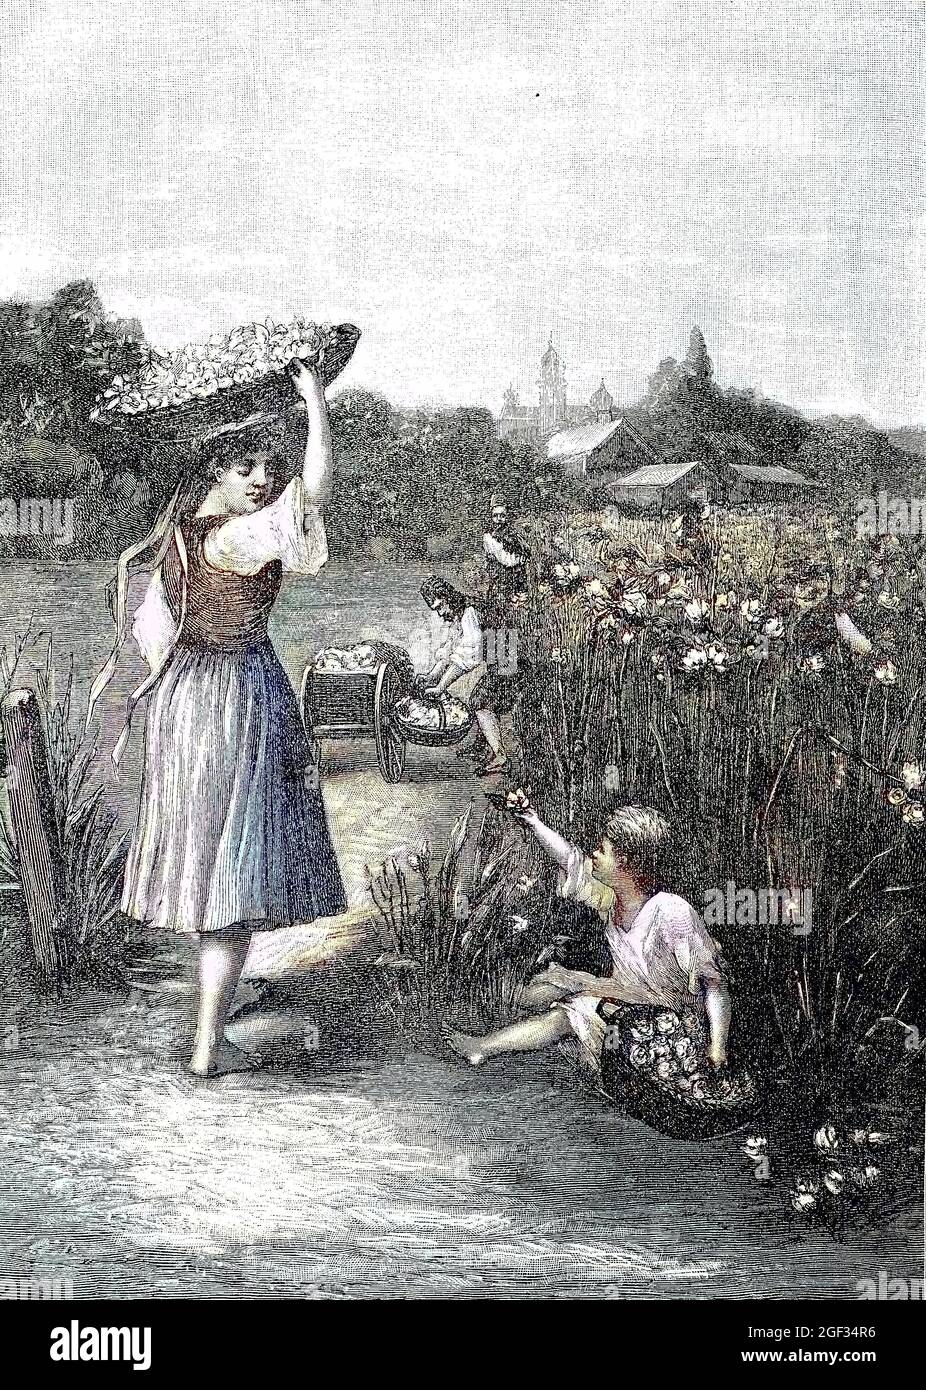 harvesting roses in bulgaria, Das Ernten von Rosen in Bulgarien, digital improved reproduction of an original print from the year 1881, Koloriert, Kolorierung, koloriert, handkoloriert, Hand-colouring, hand coloured, colored, Stock Photo